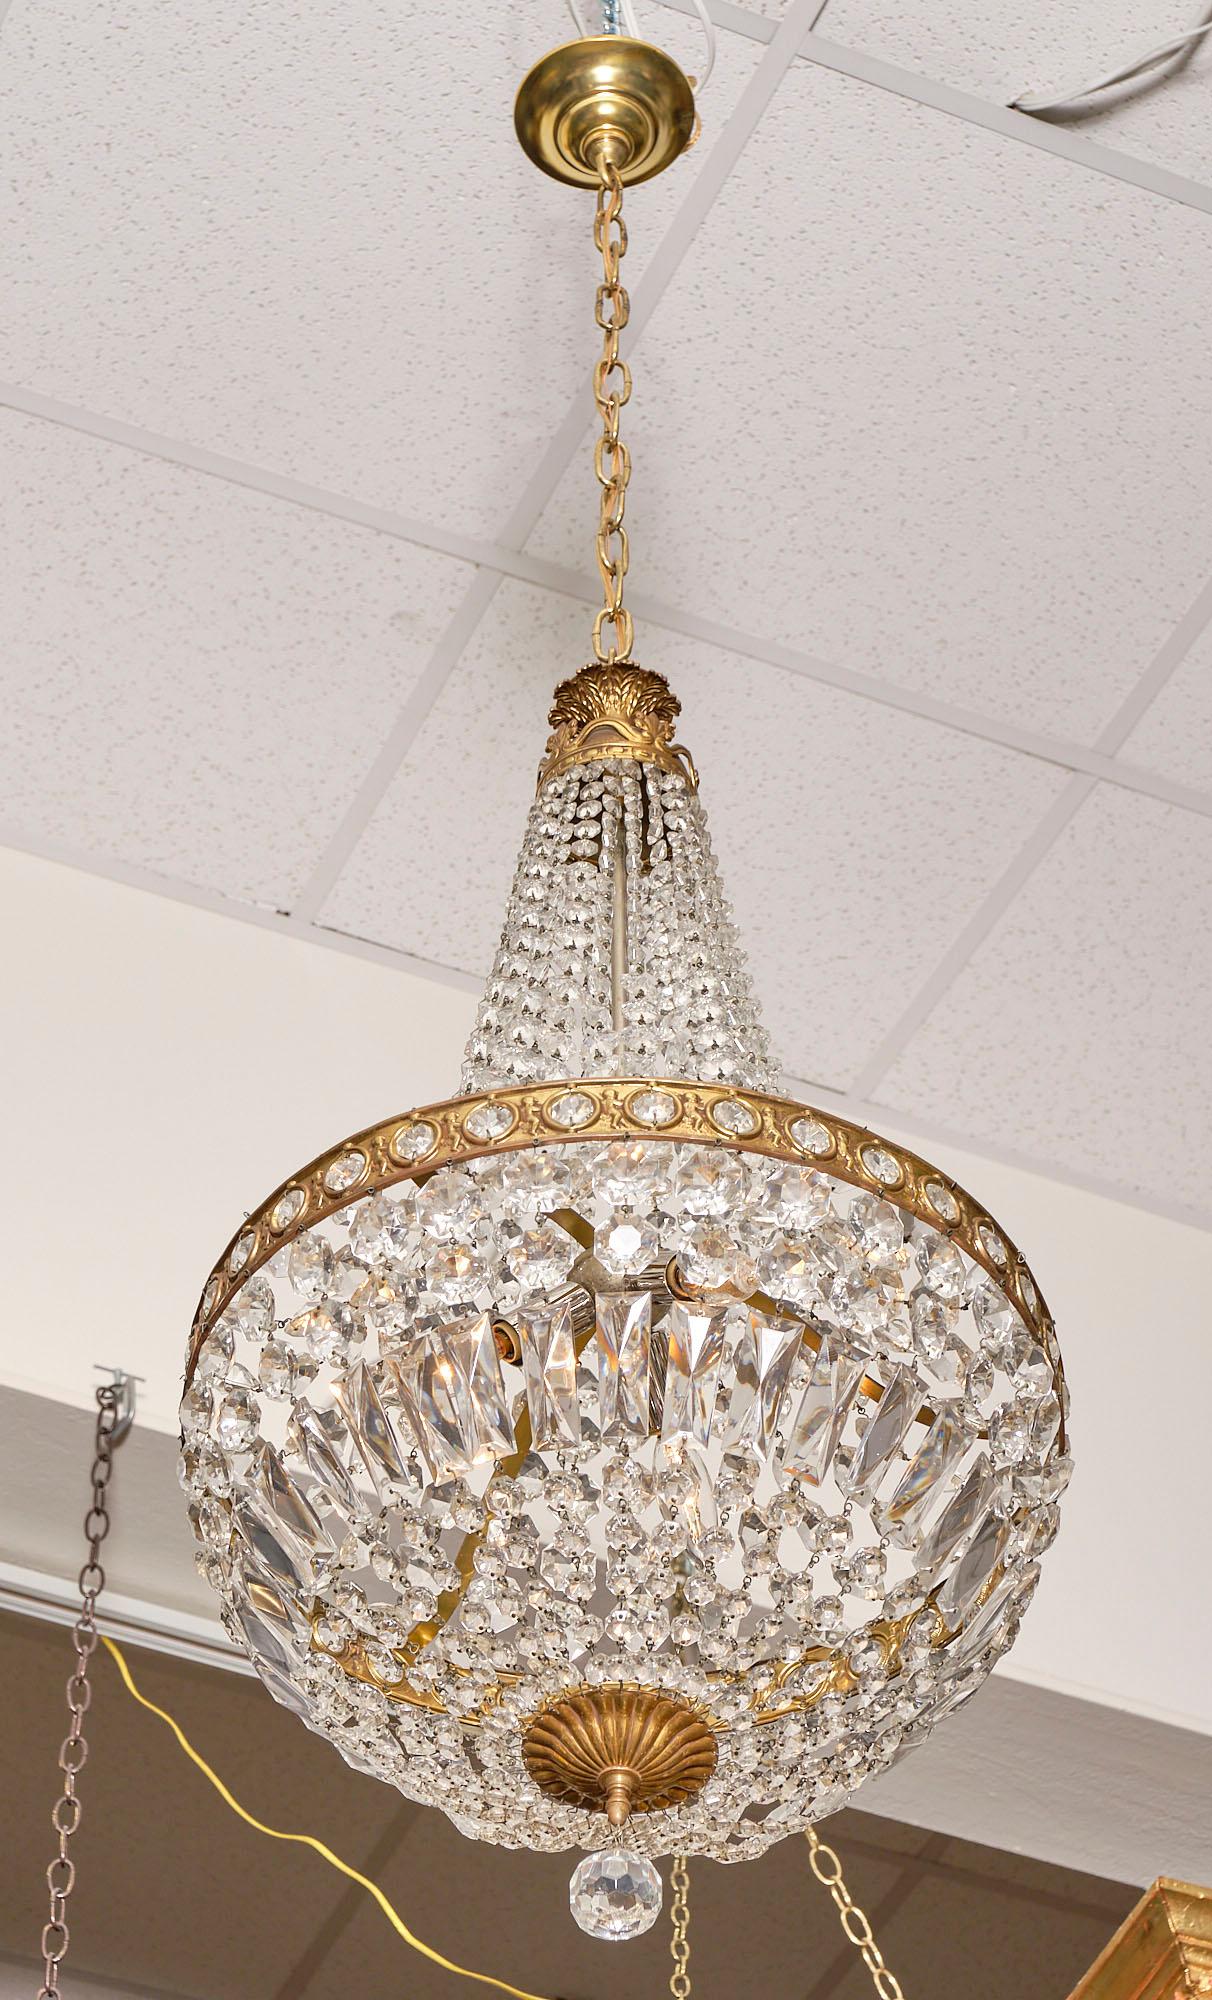 Crystal Empire style vintage chandelier from France with an embossed gilt brass structure and featuring an array of cut crystal. It has been newly wired to fit US standards.